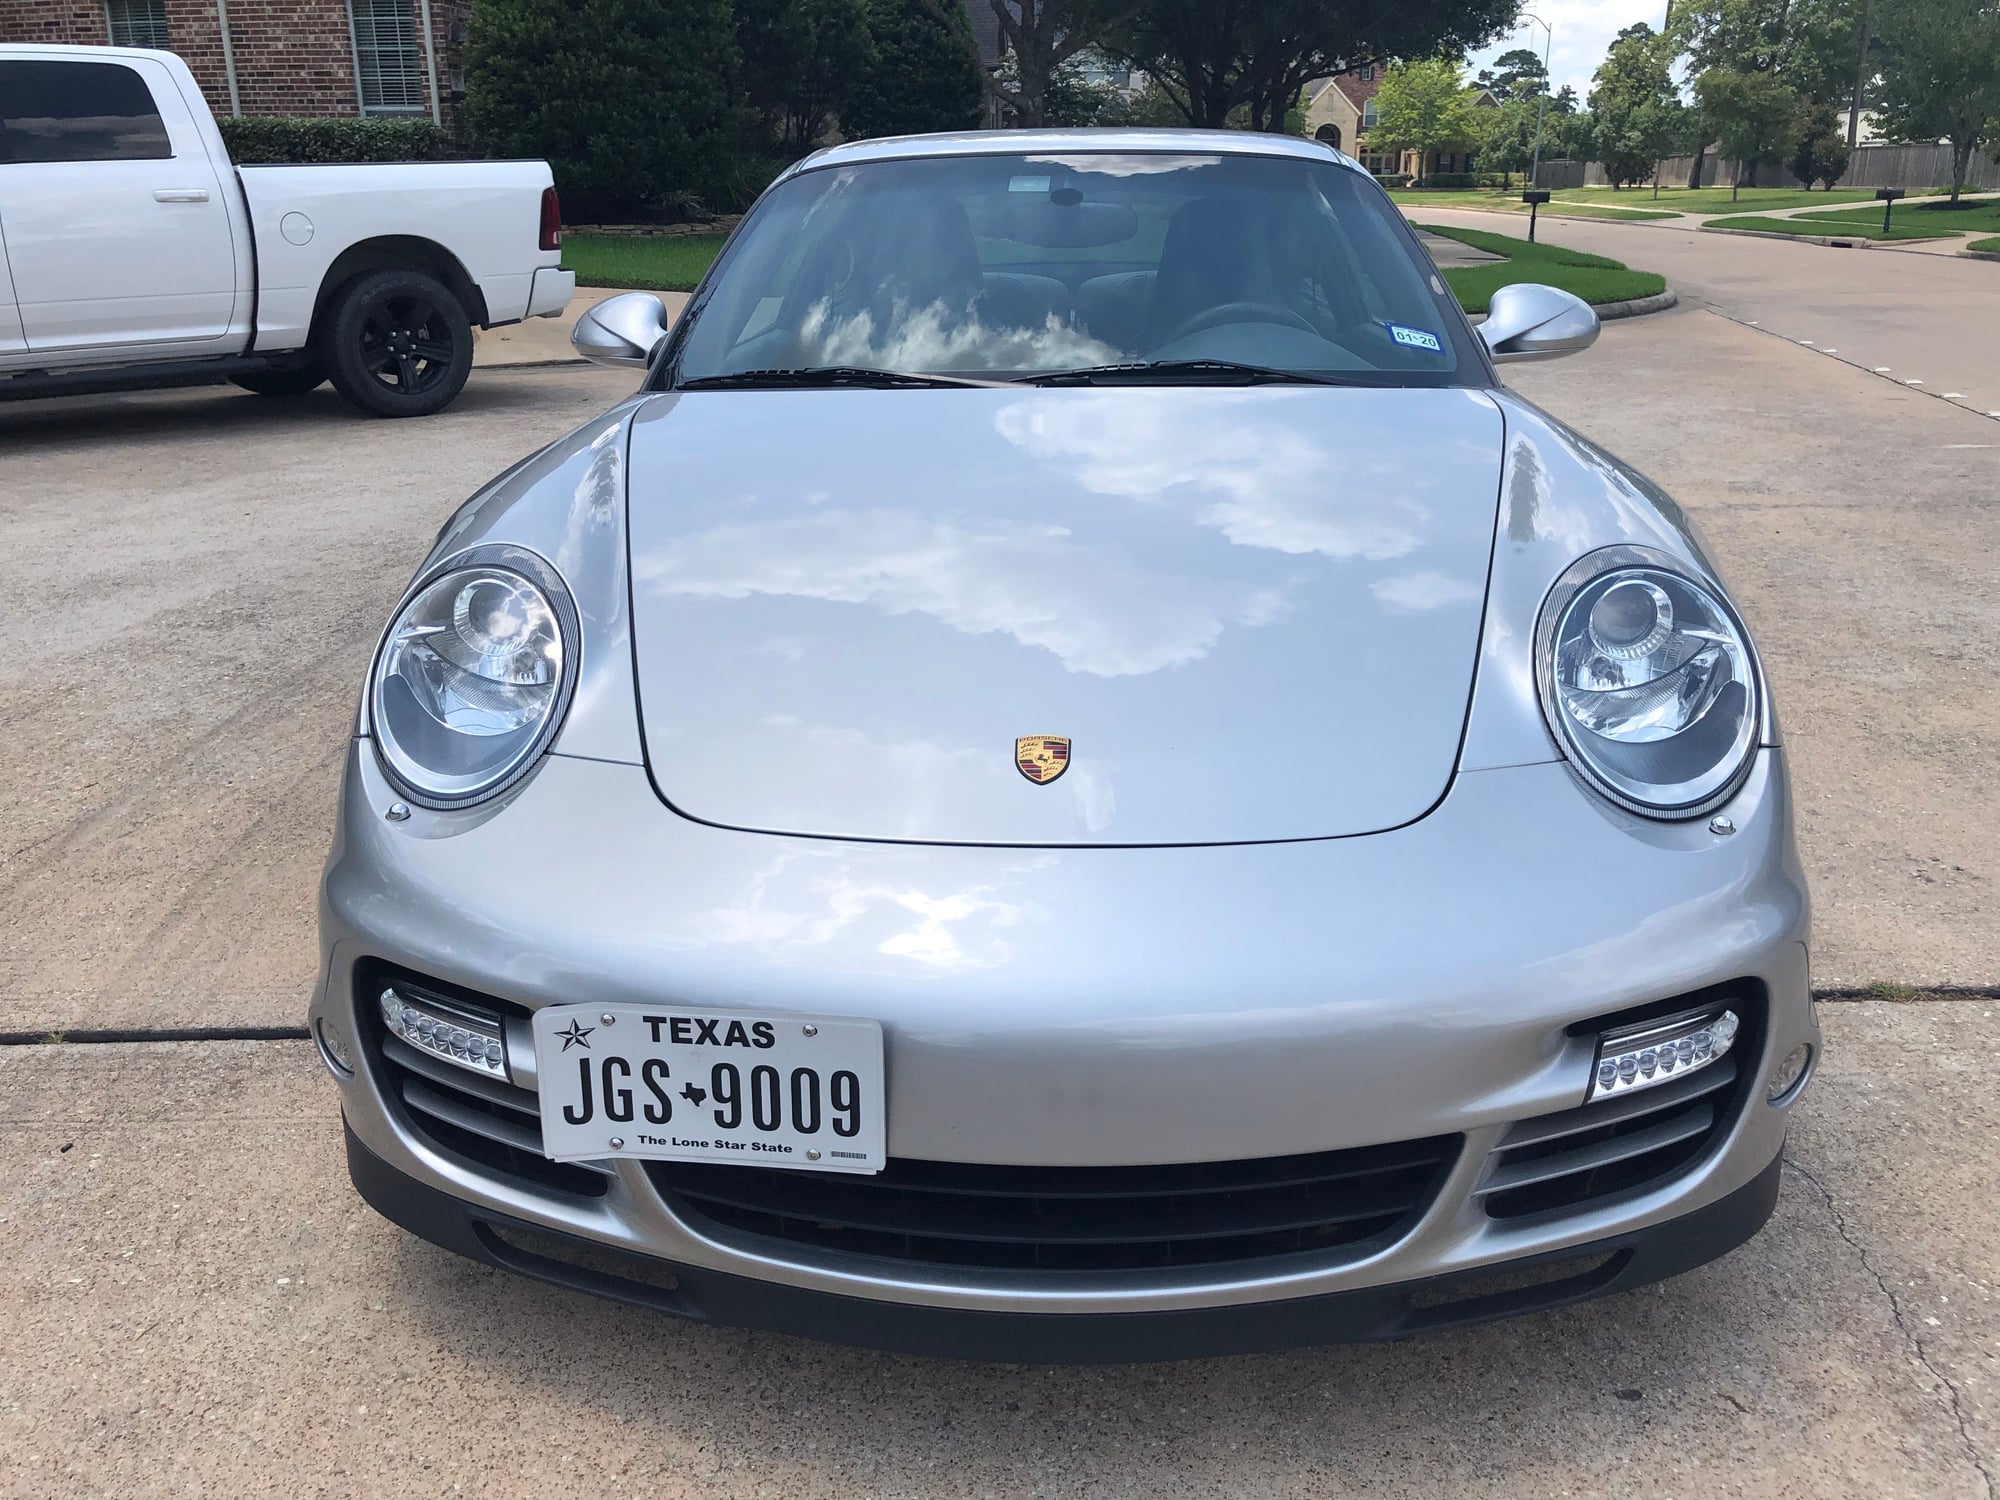 2010 Porsche 911 - 2010 Porsche 911 Turbo (997.2 TT PDK) - Used - VIN WP0AD2A96AS766371 - 6 cyl - AWD - Automatic - Coupe - Silver - Cypress, TX 77429, United States